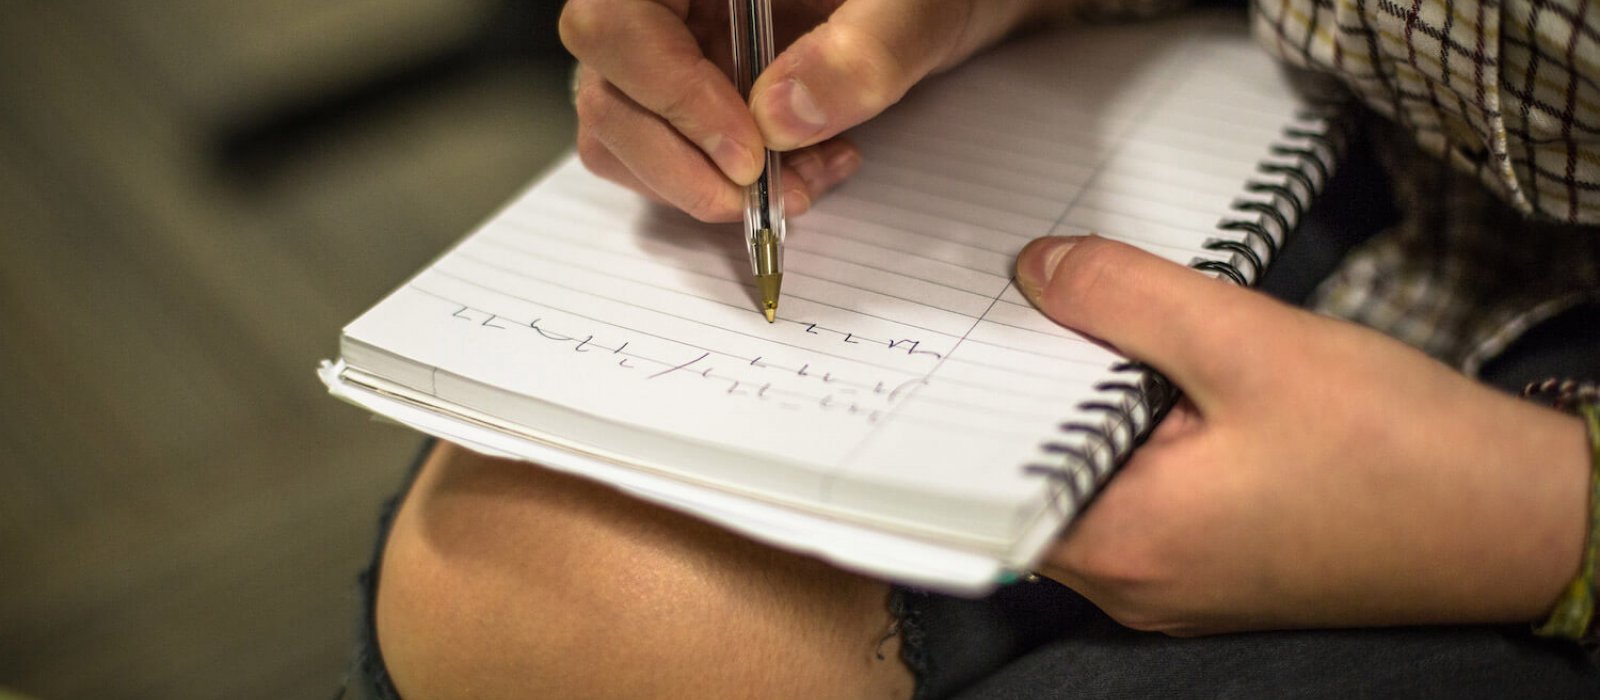 A person writing on a notepad with a biro